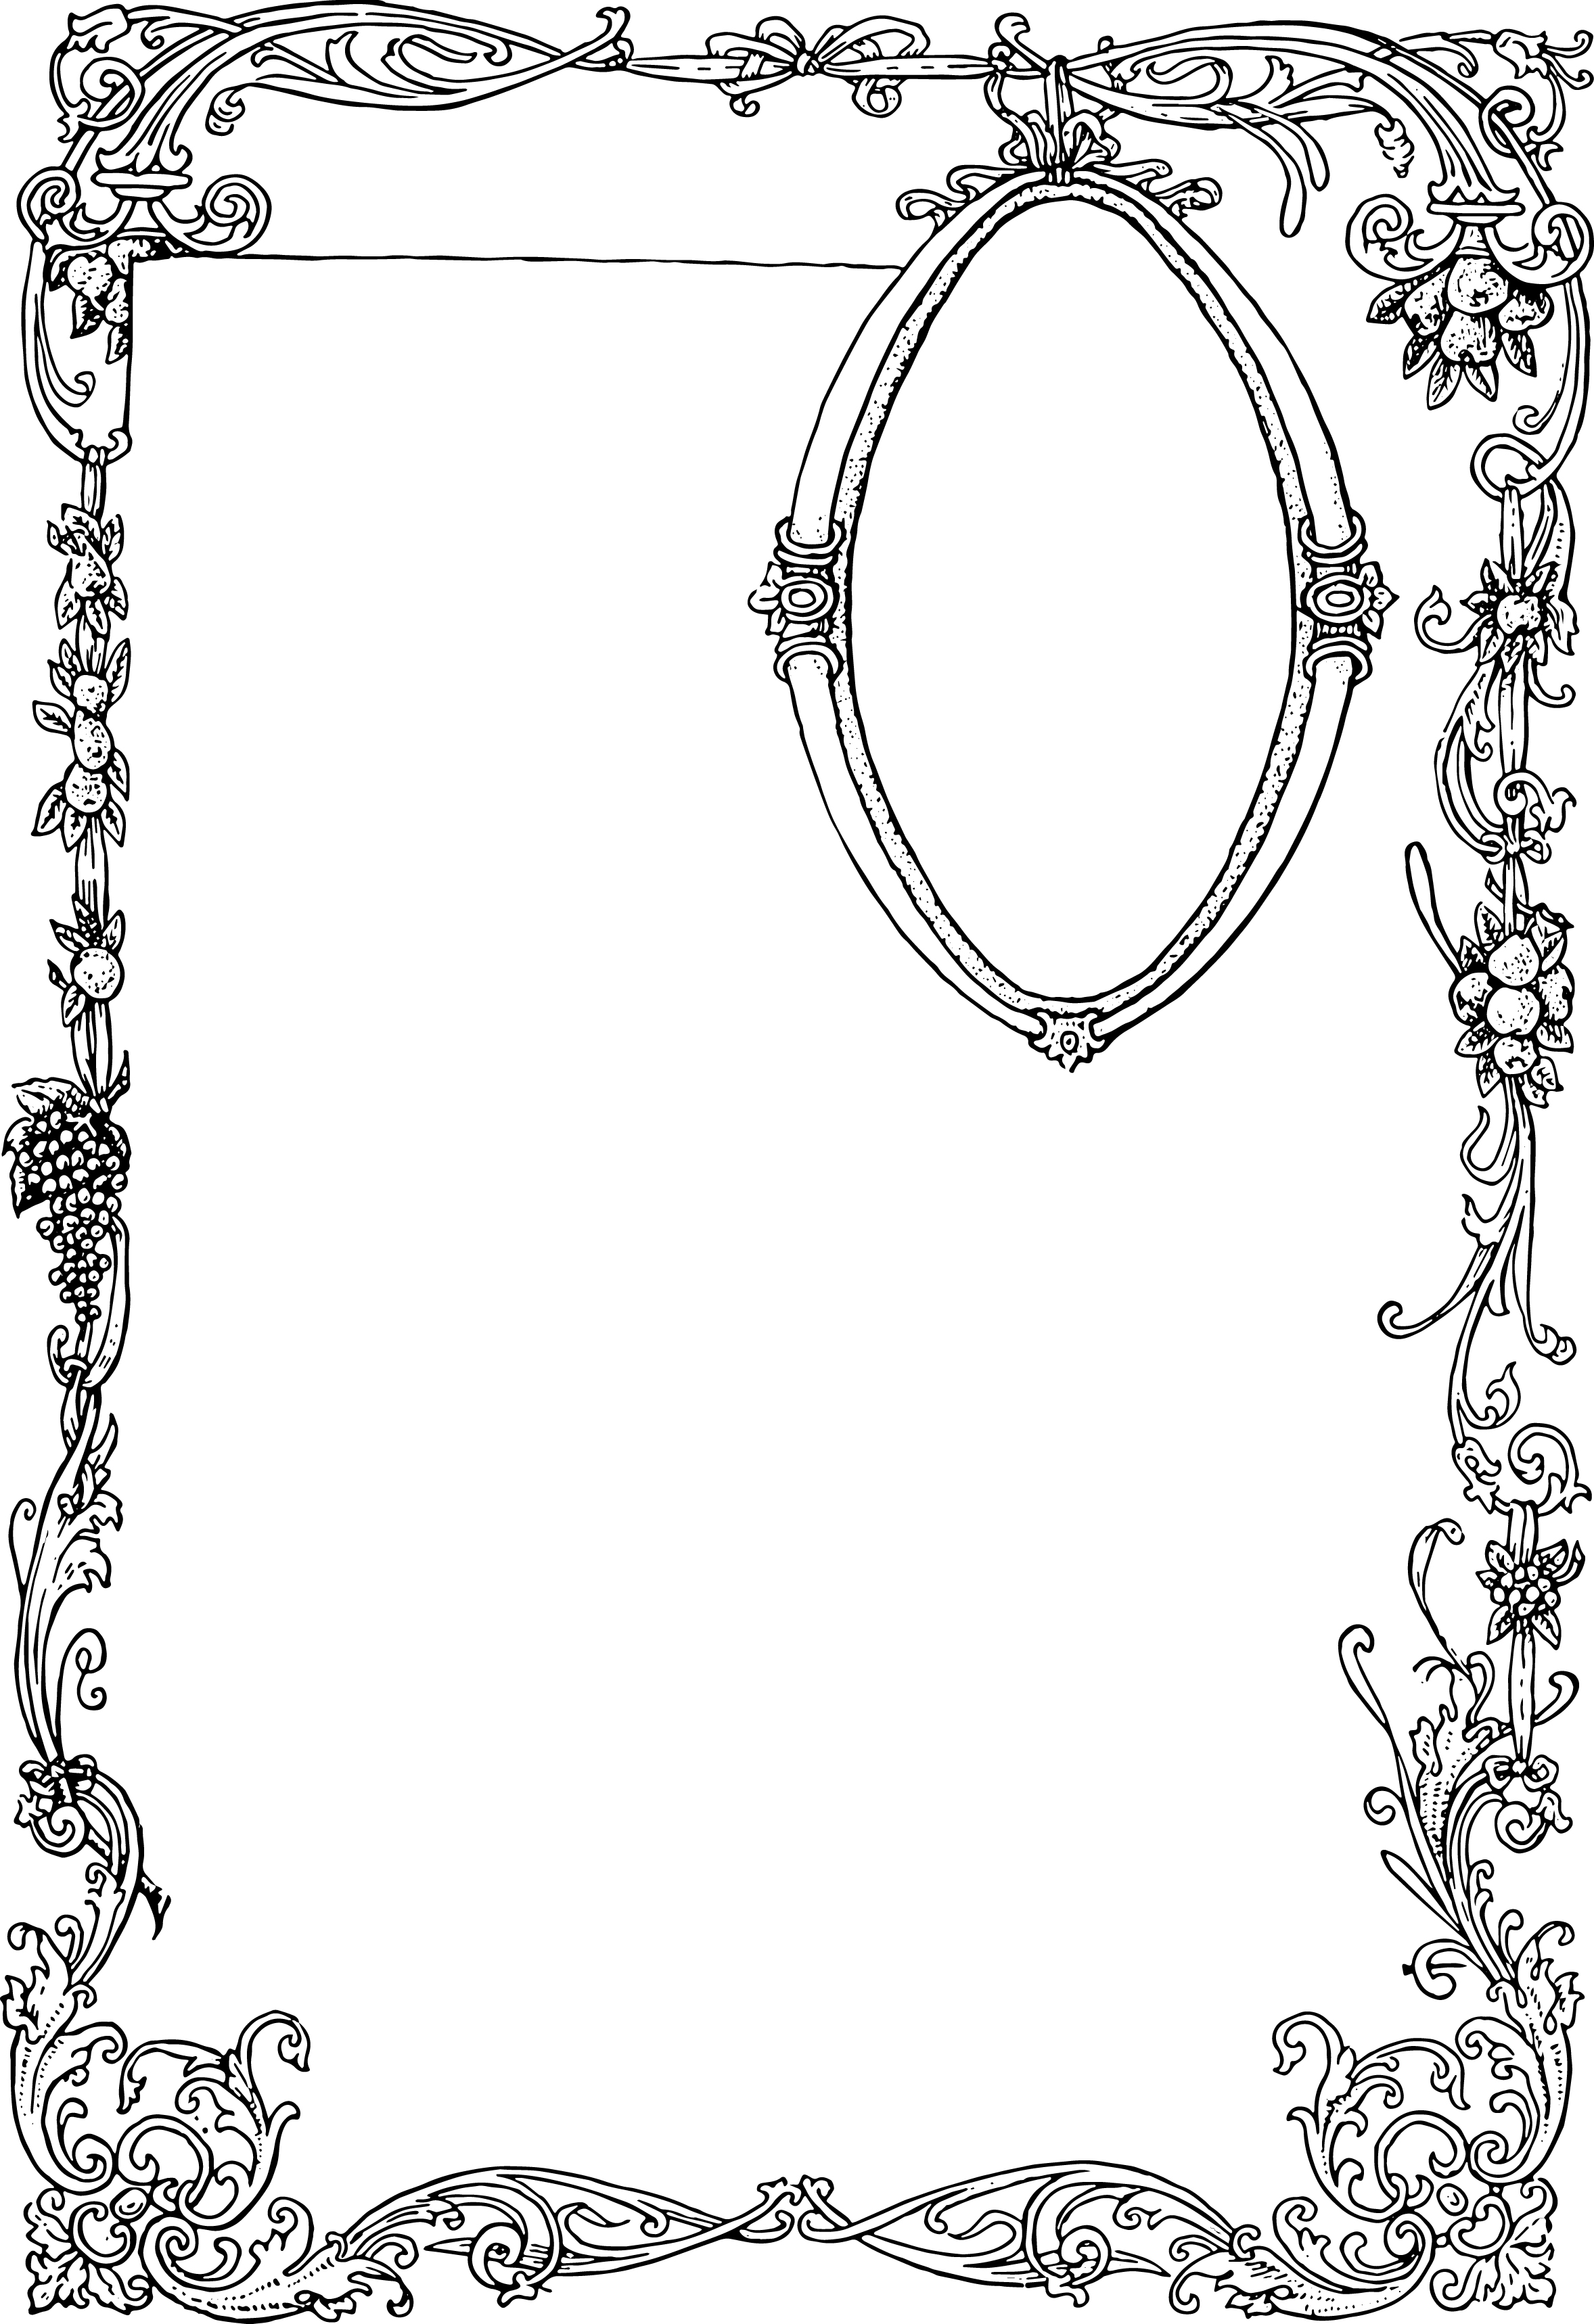 Stunning Free Vector Art - Ornate Border and Frame | Oh So Nifty ...